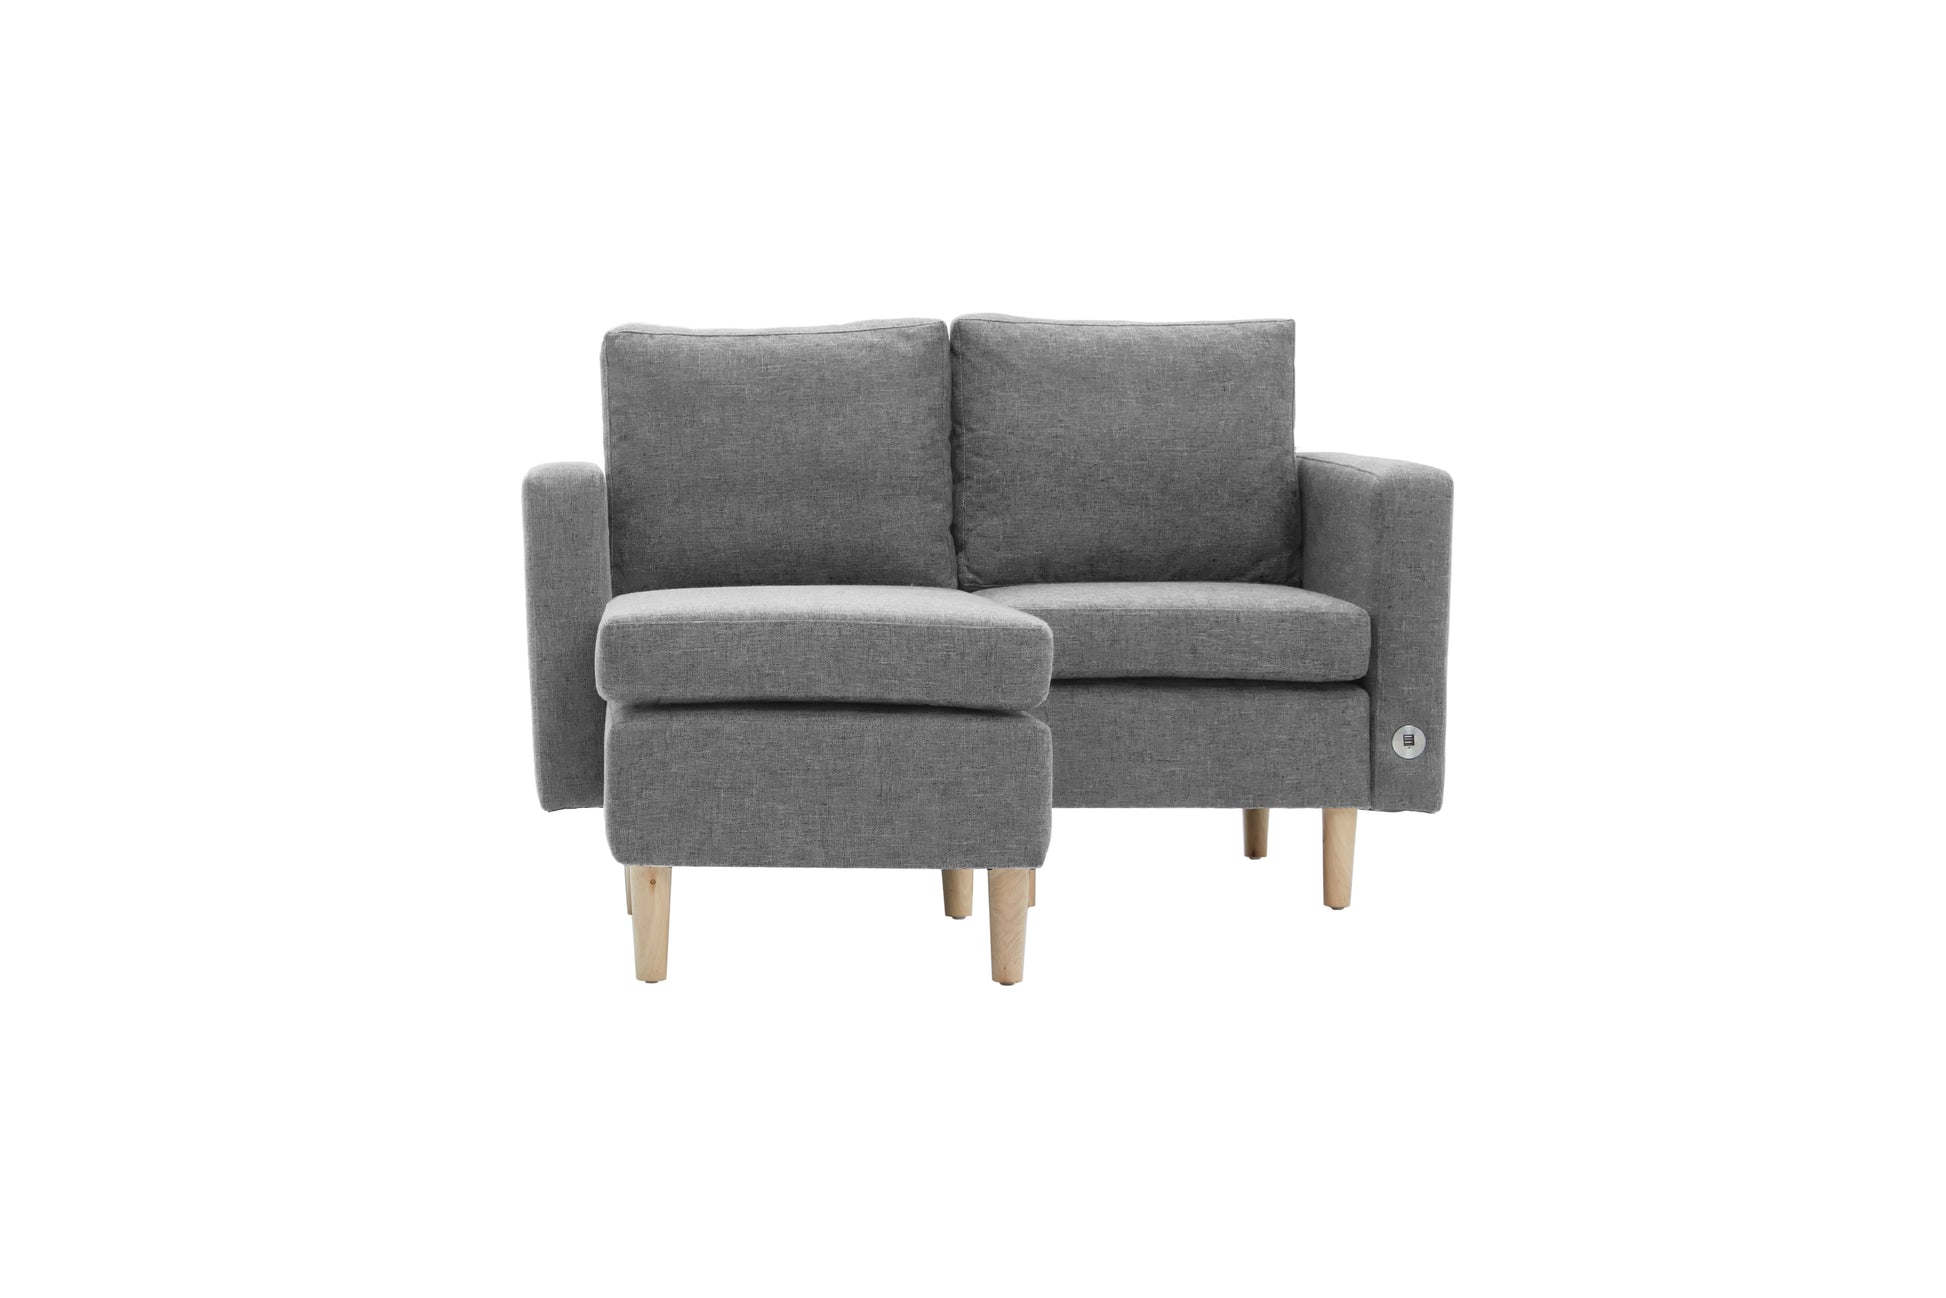 Tinker Sofa - Cocoon Series (Ottoman Only) Tinker Furniture PH